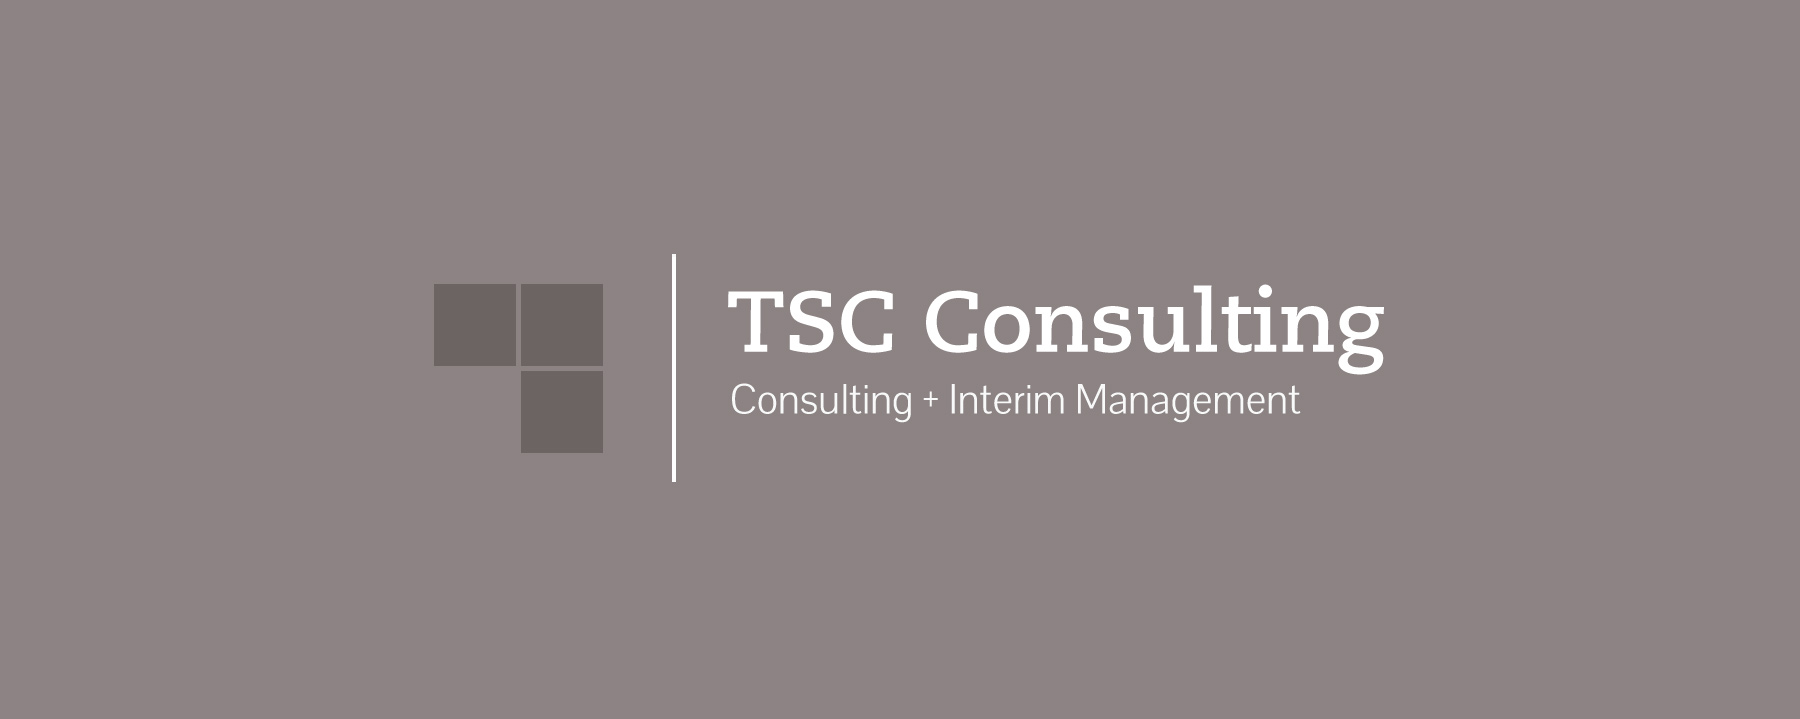 Logogestaltung TSC-Consulting | Groß Gerau | by Ilyas Susever